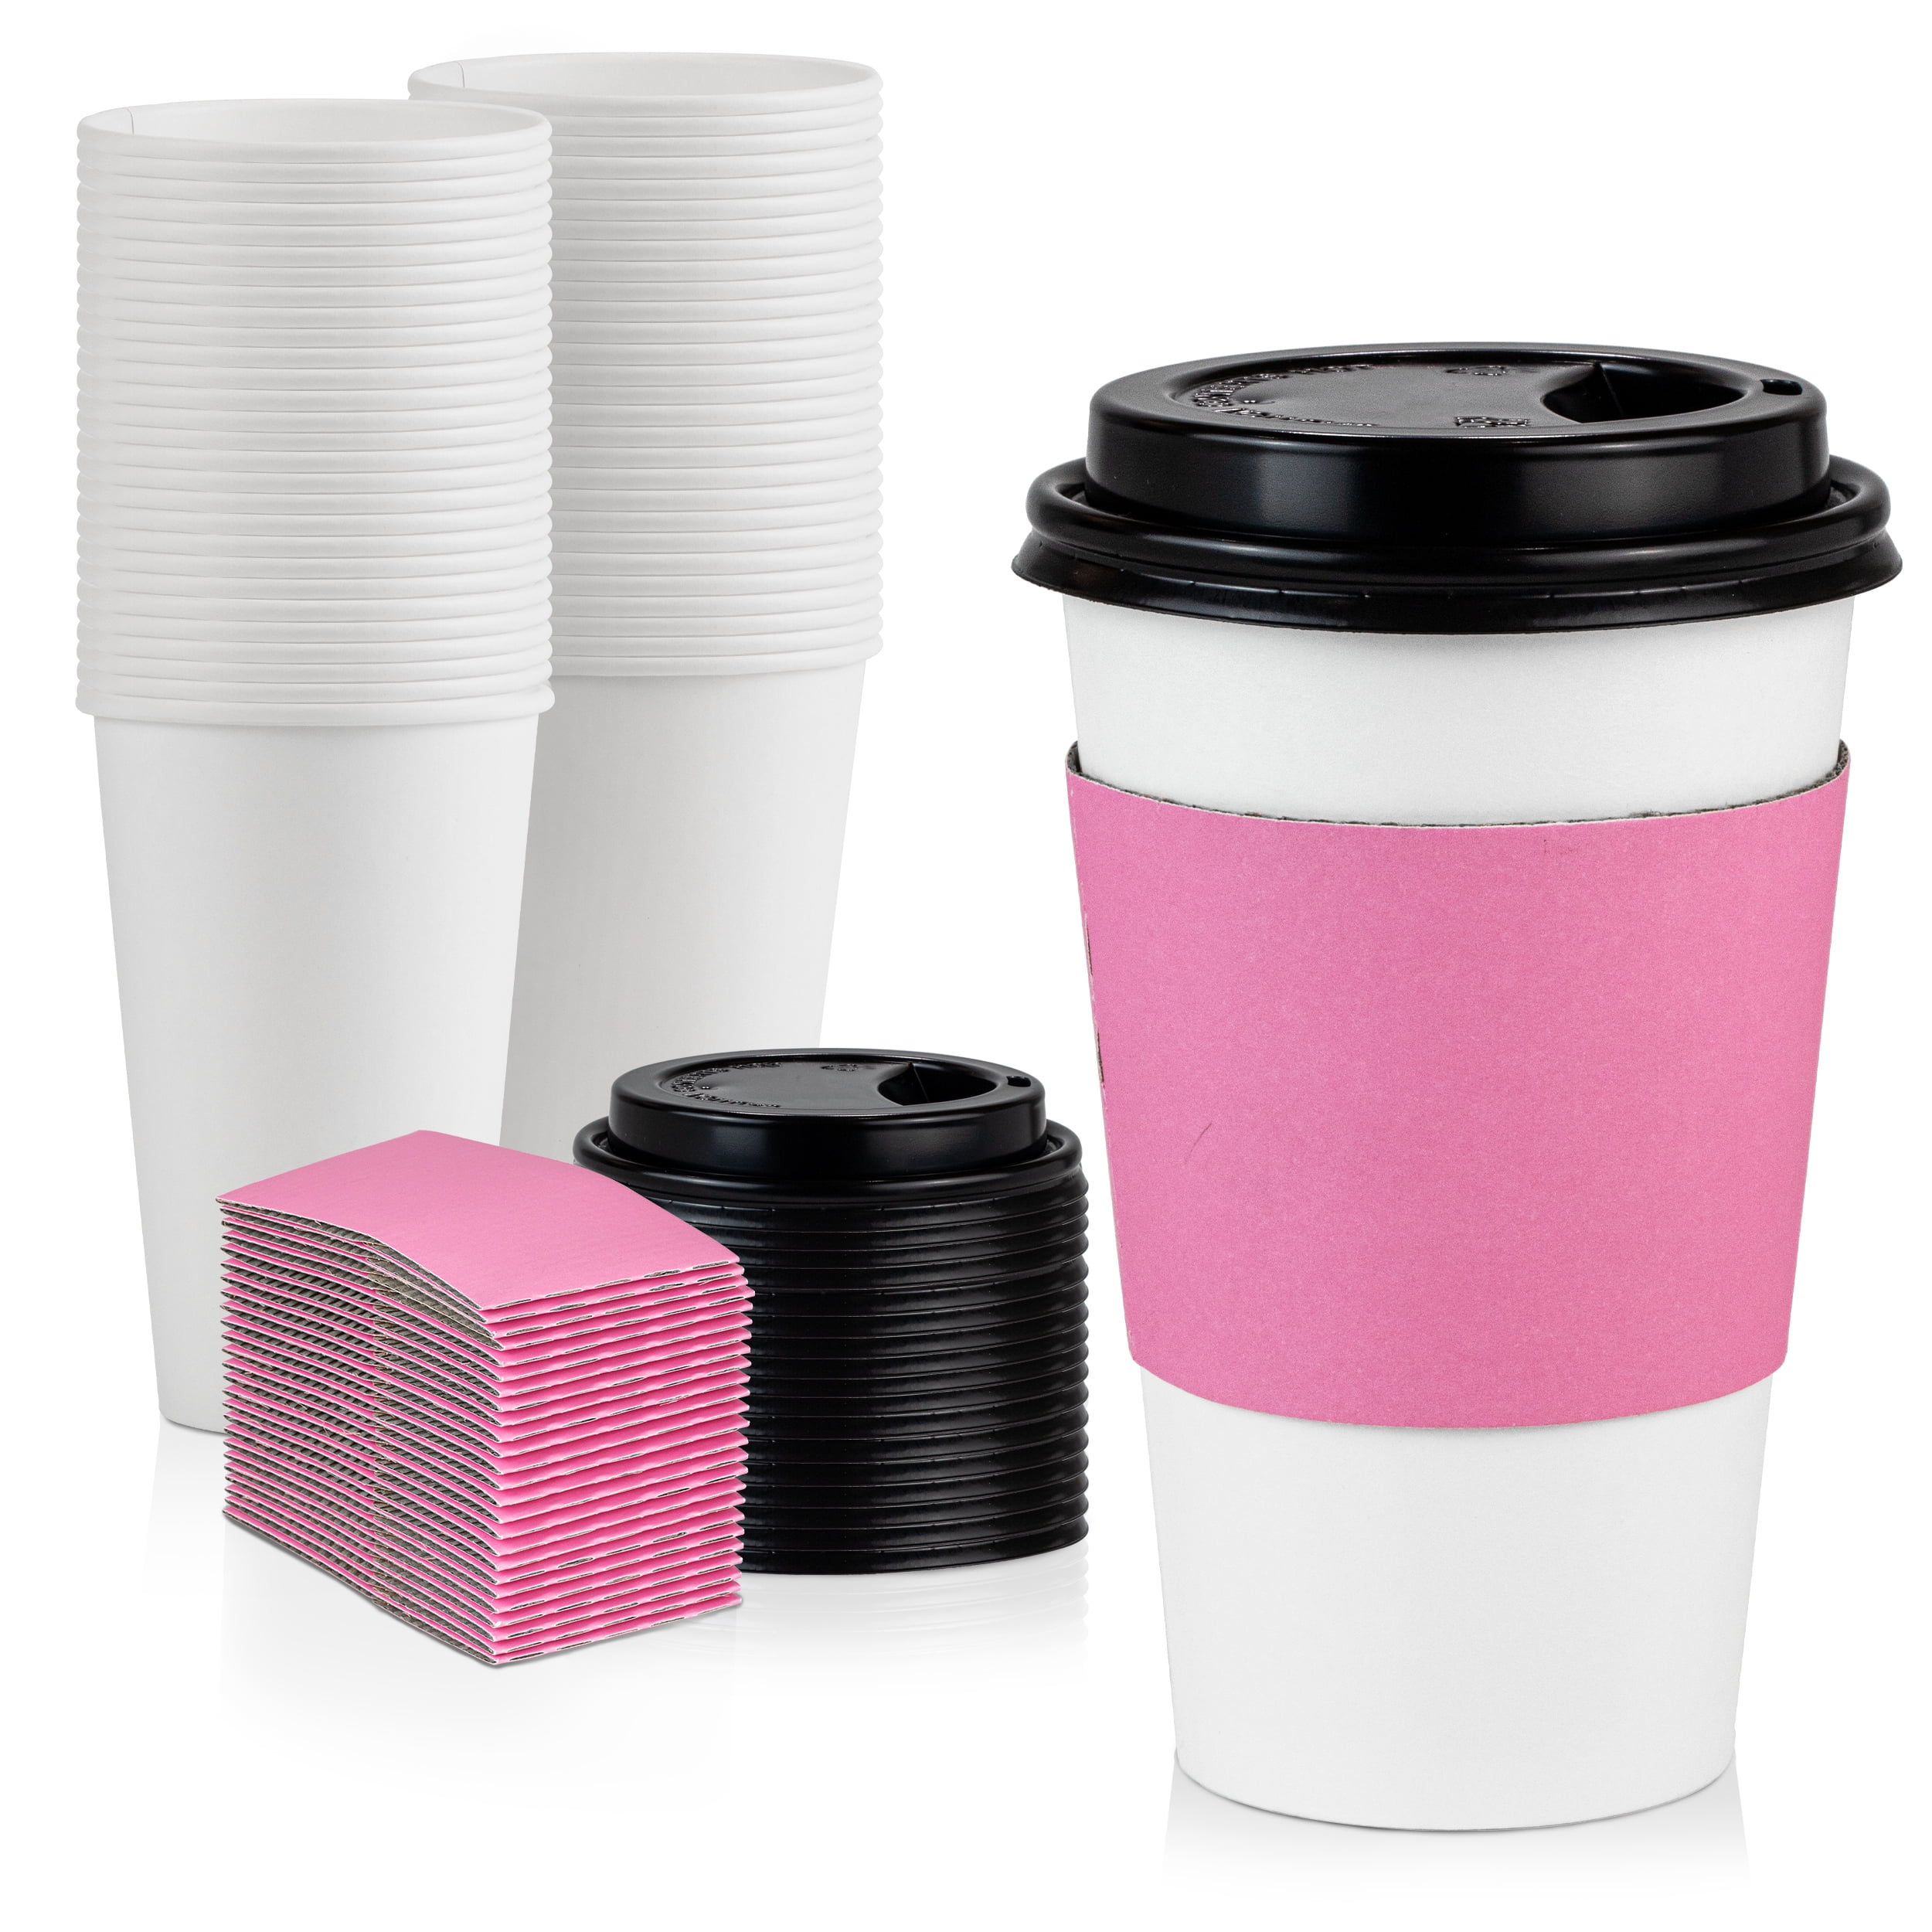 Details about   100Pcs White Drinking Lid Coffee Cup Covers for Home Office Cafe Outdoor Picnic 